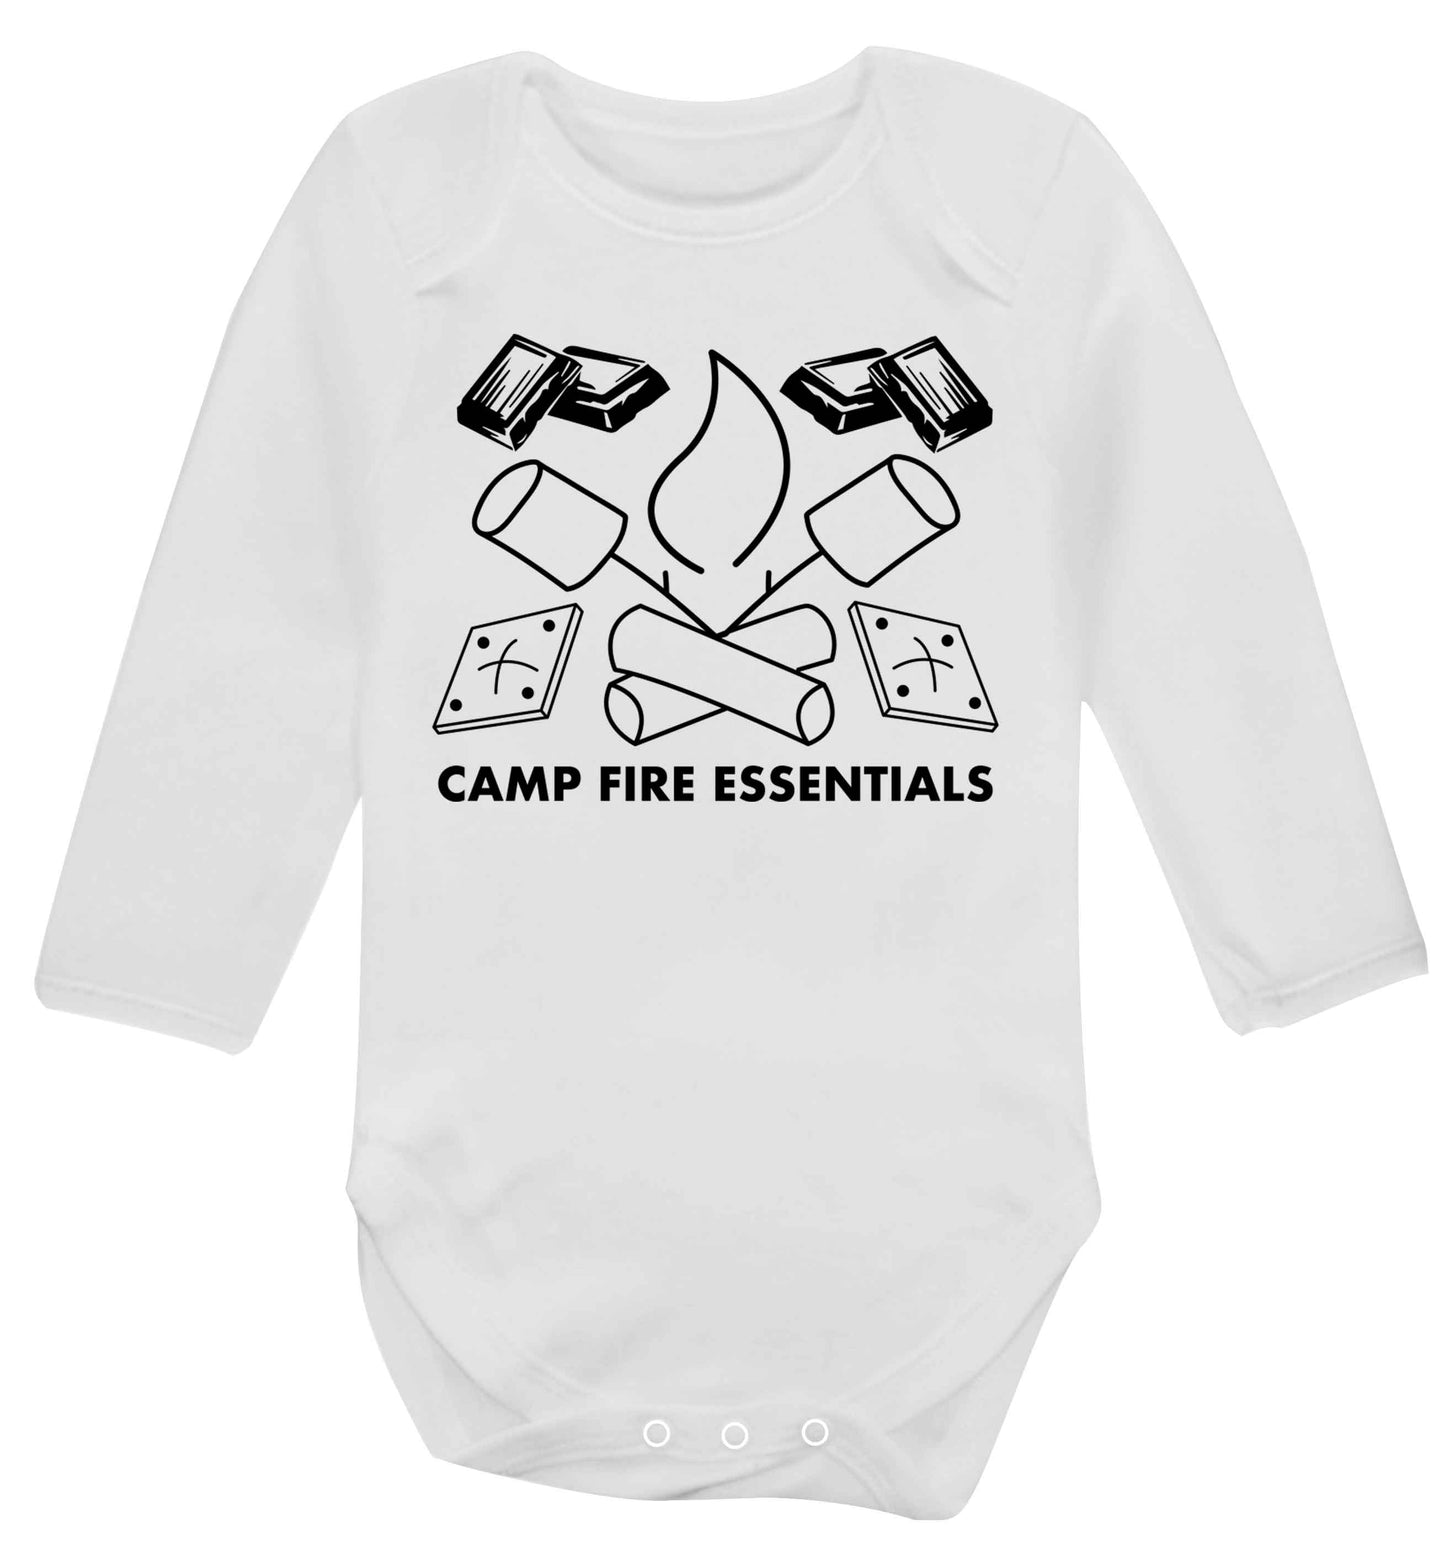 Campfire essentials Baby Vest long sleeved white 6-12 months